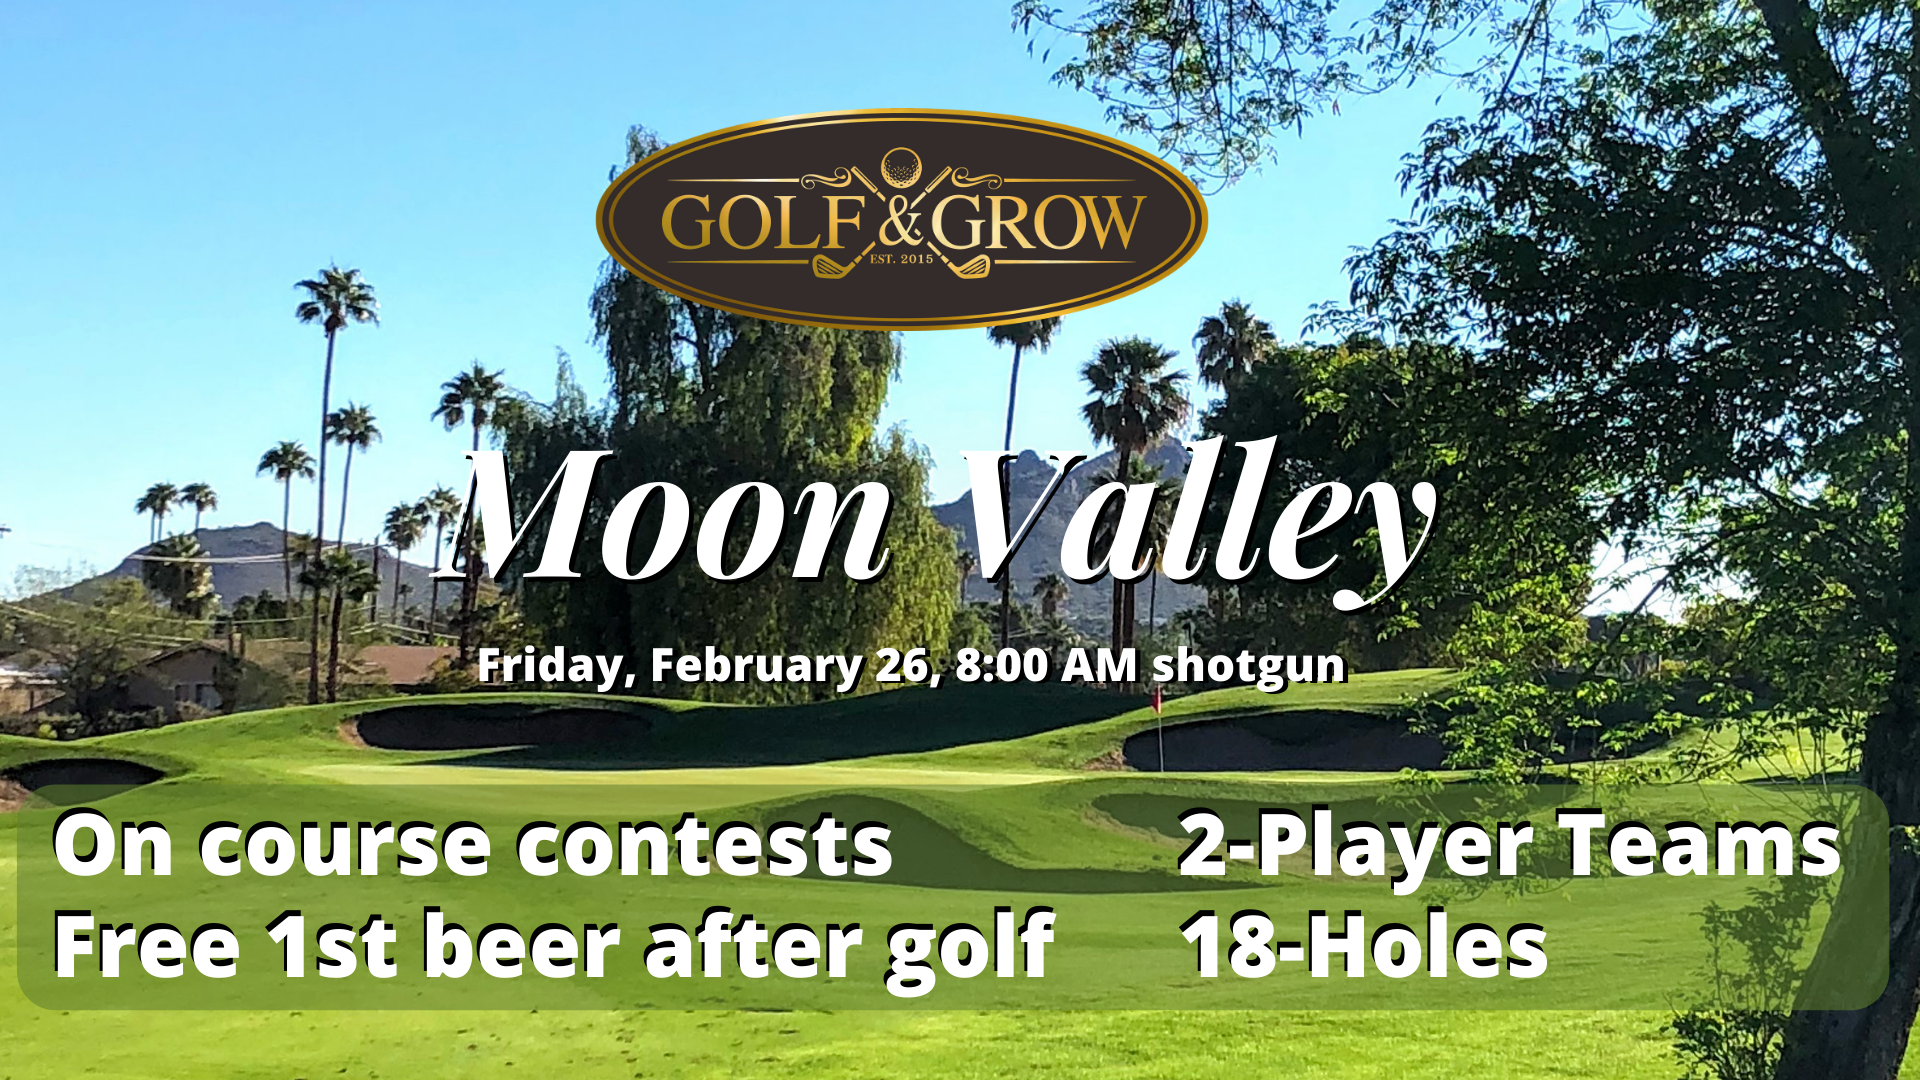 Golf & Grow tournament at Moon Valley country club is a top 10 golf experience in AZ